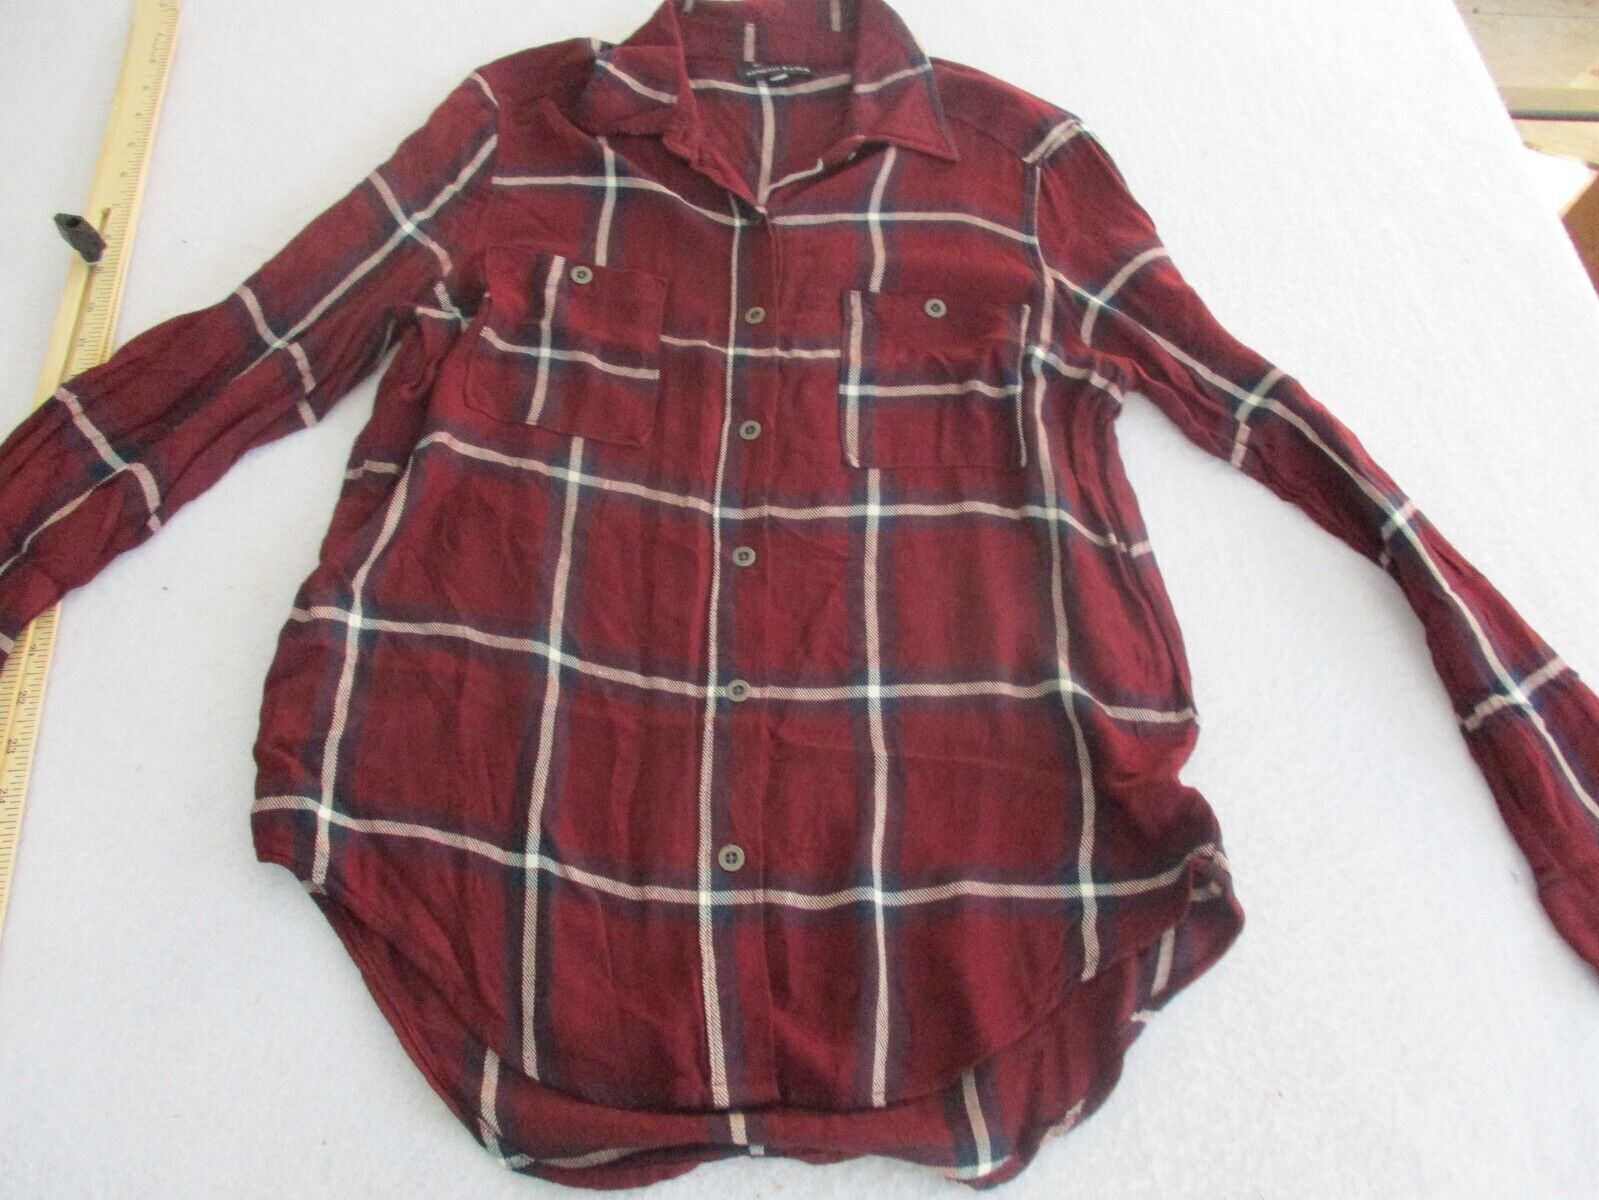 kendall and kylie Blouse button up Shirt sz s - image 1